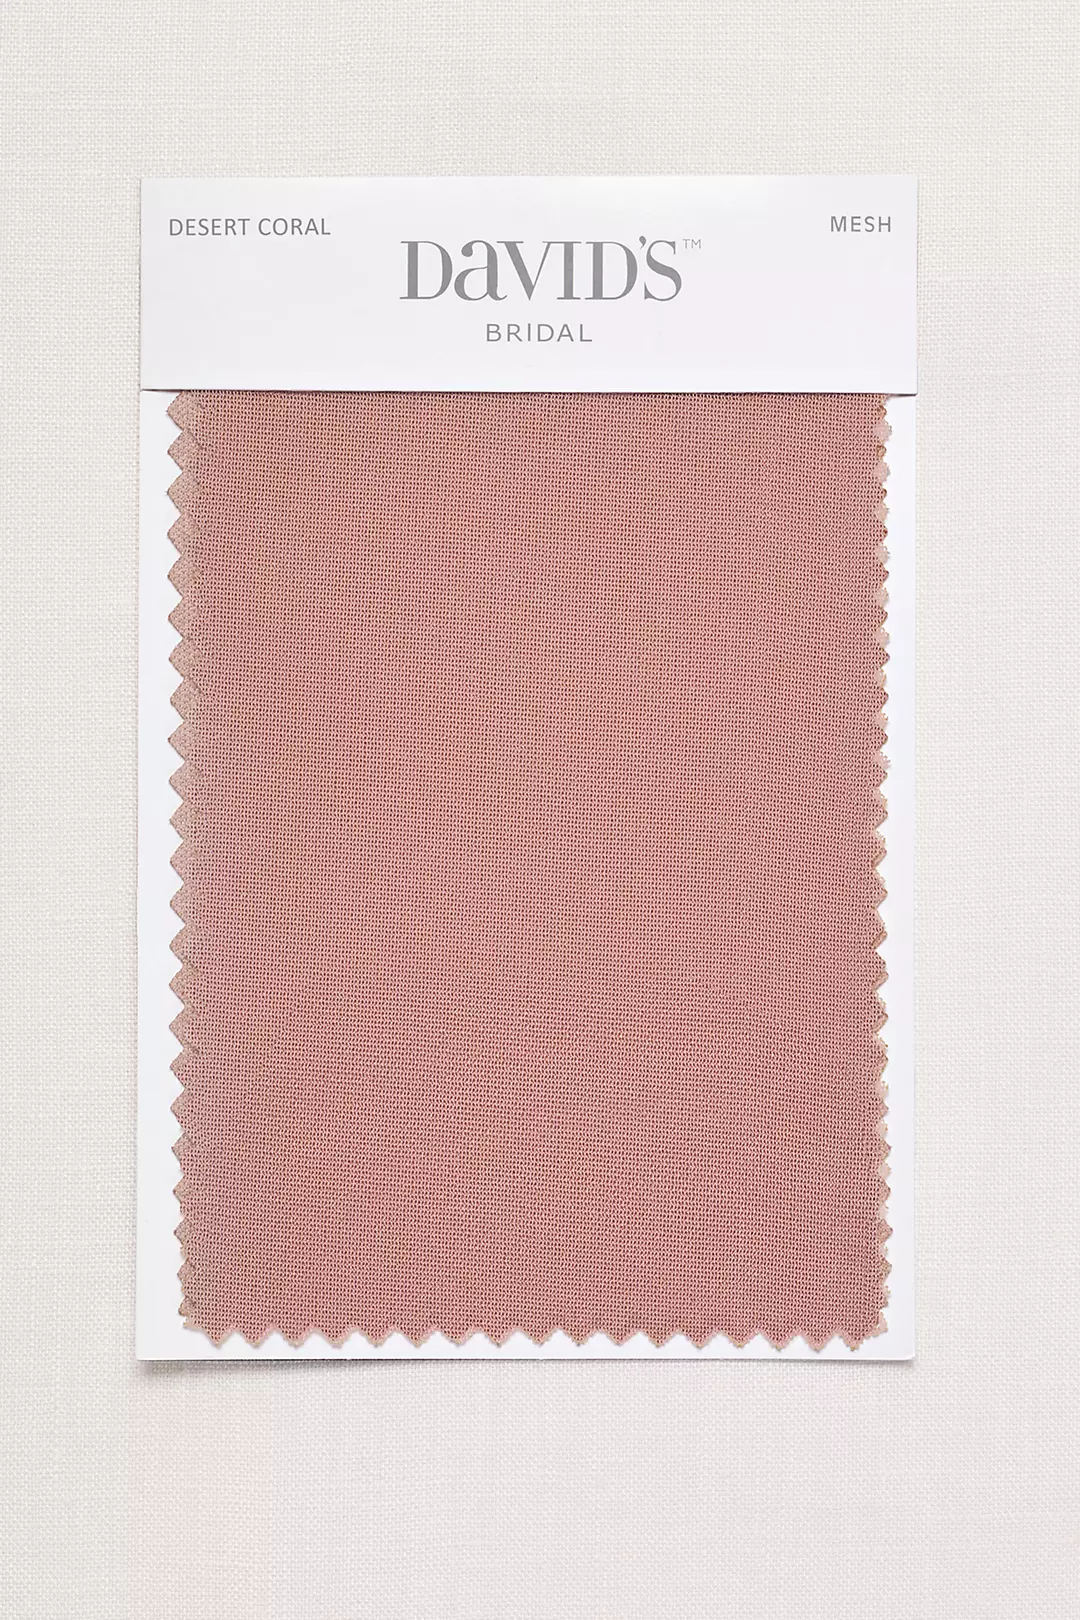 Desert Coral Fabric Swatch Image